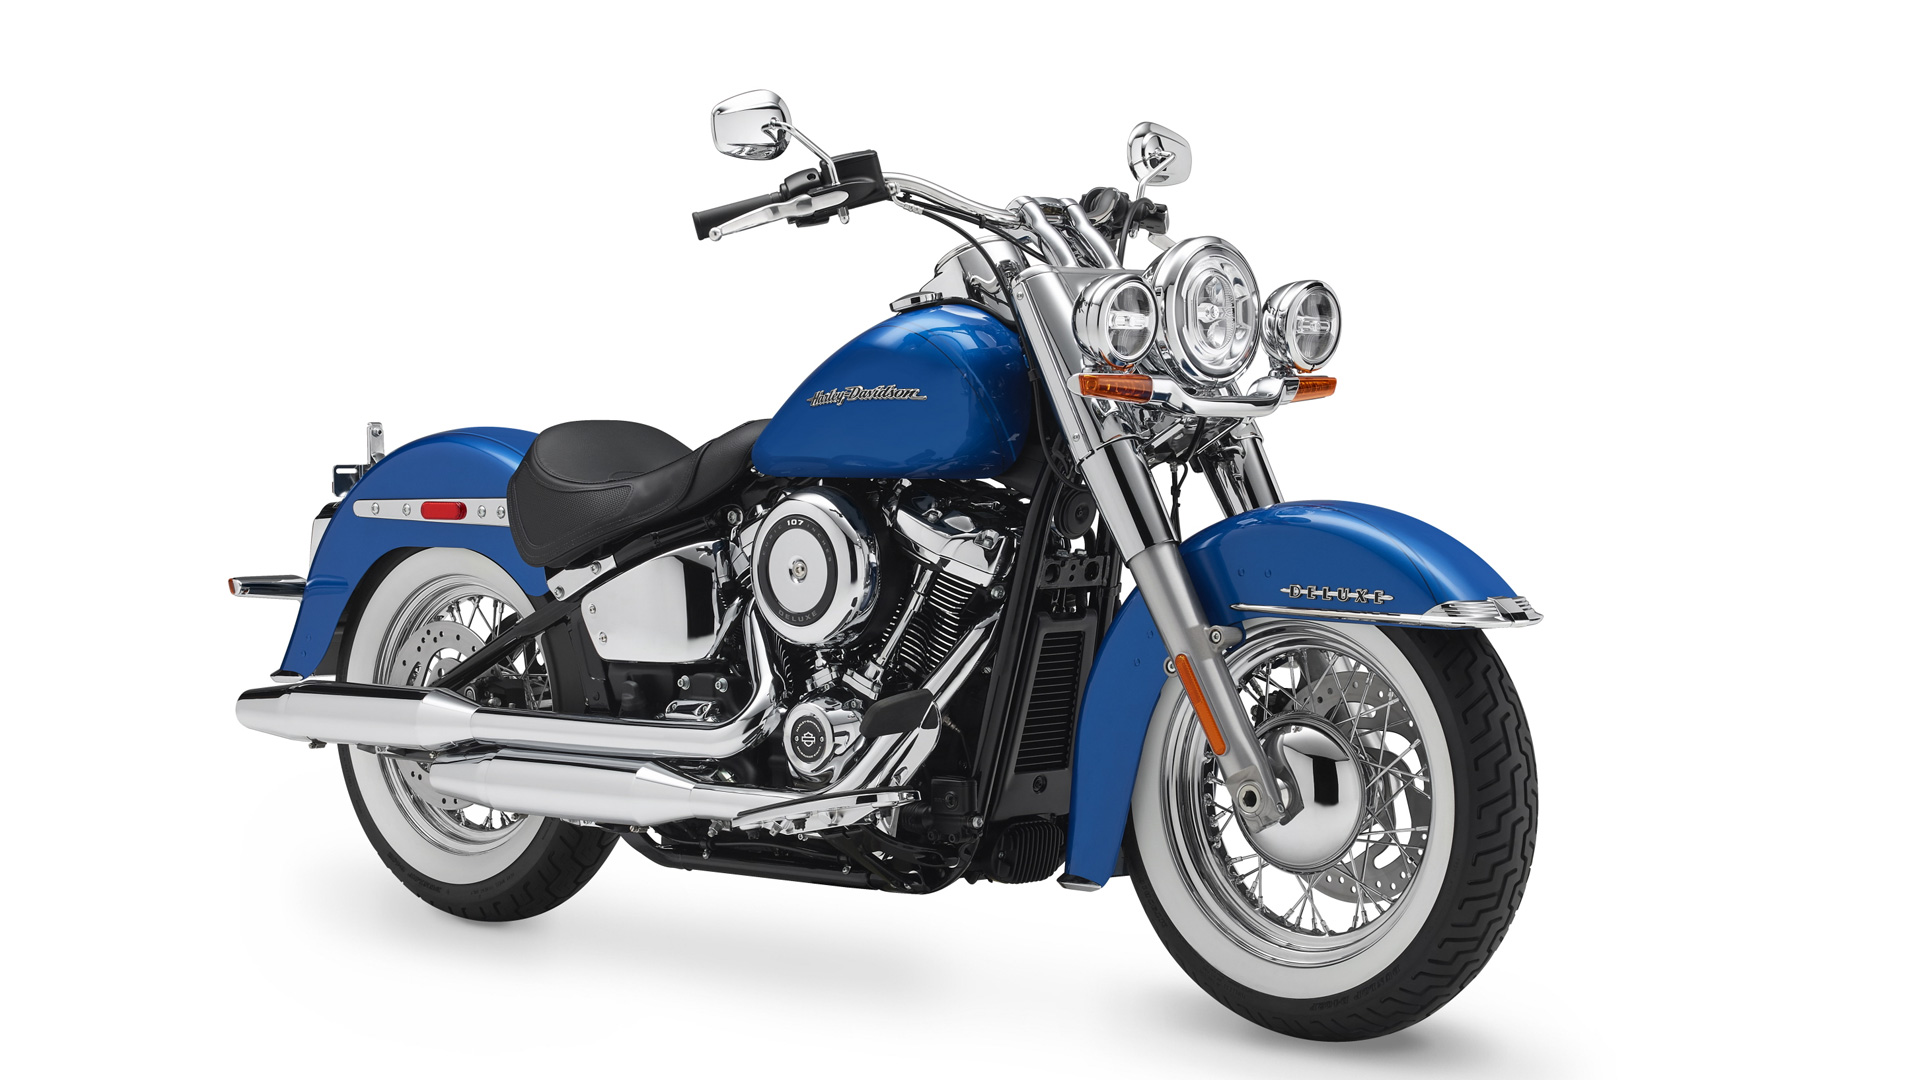 Harley Davidson Deluxe 2018 Price Mileage Reviews Specification Gallery Overdrive